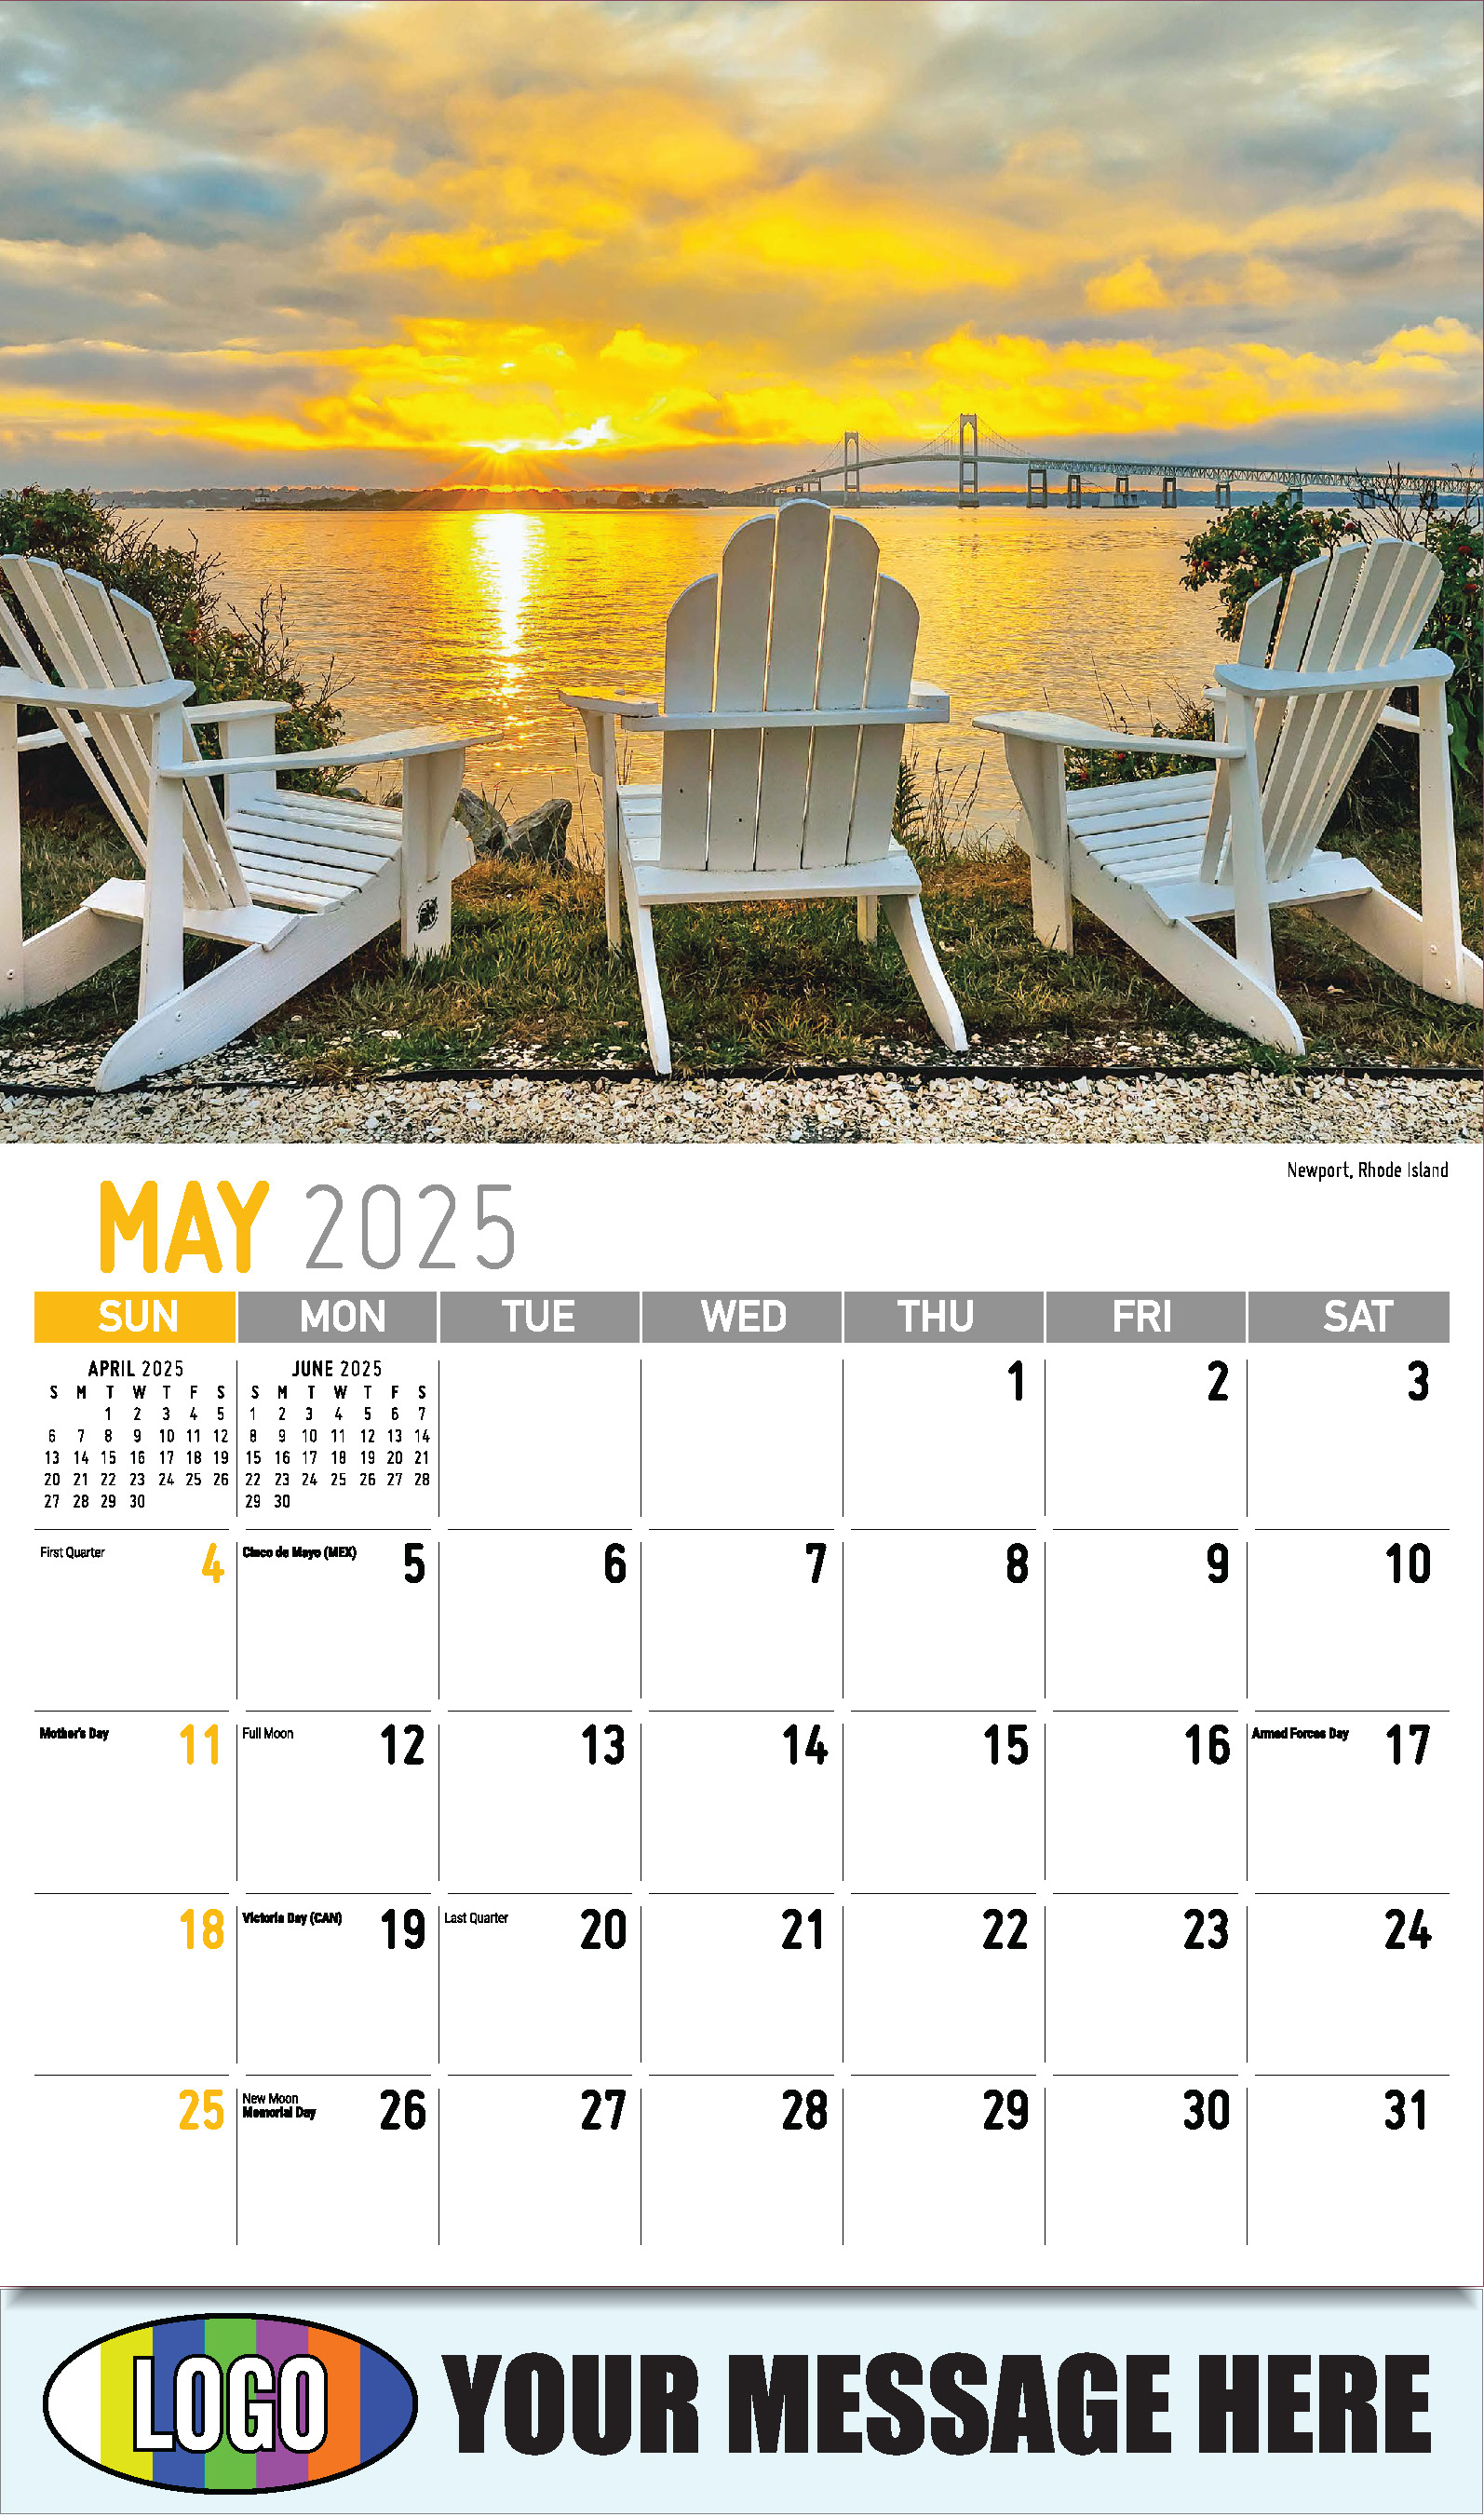 Scenes of New England 2025 Business Advertising Wall Calendar - May